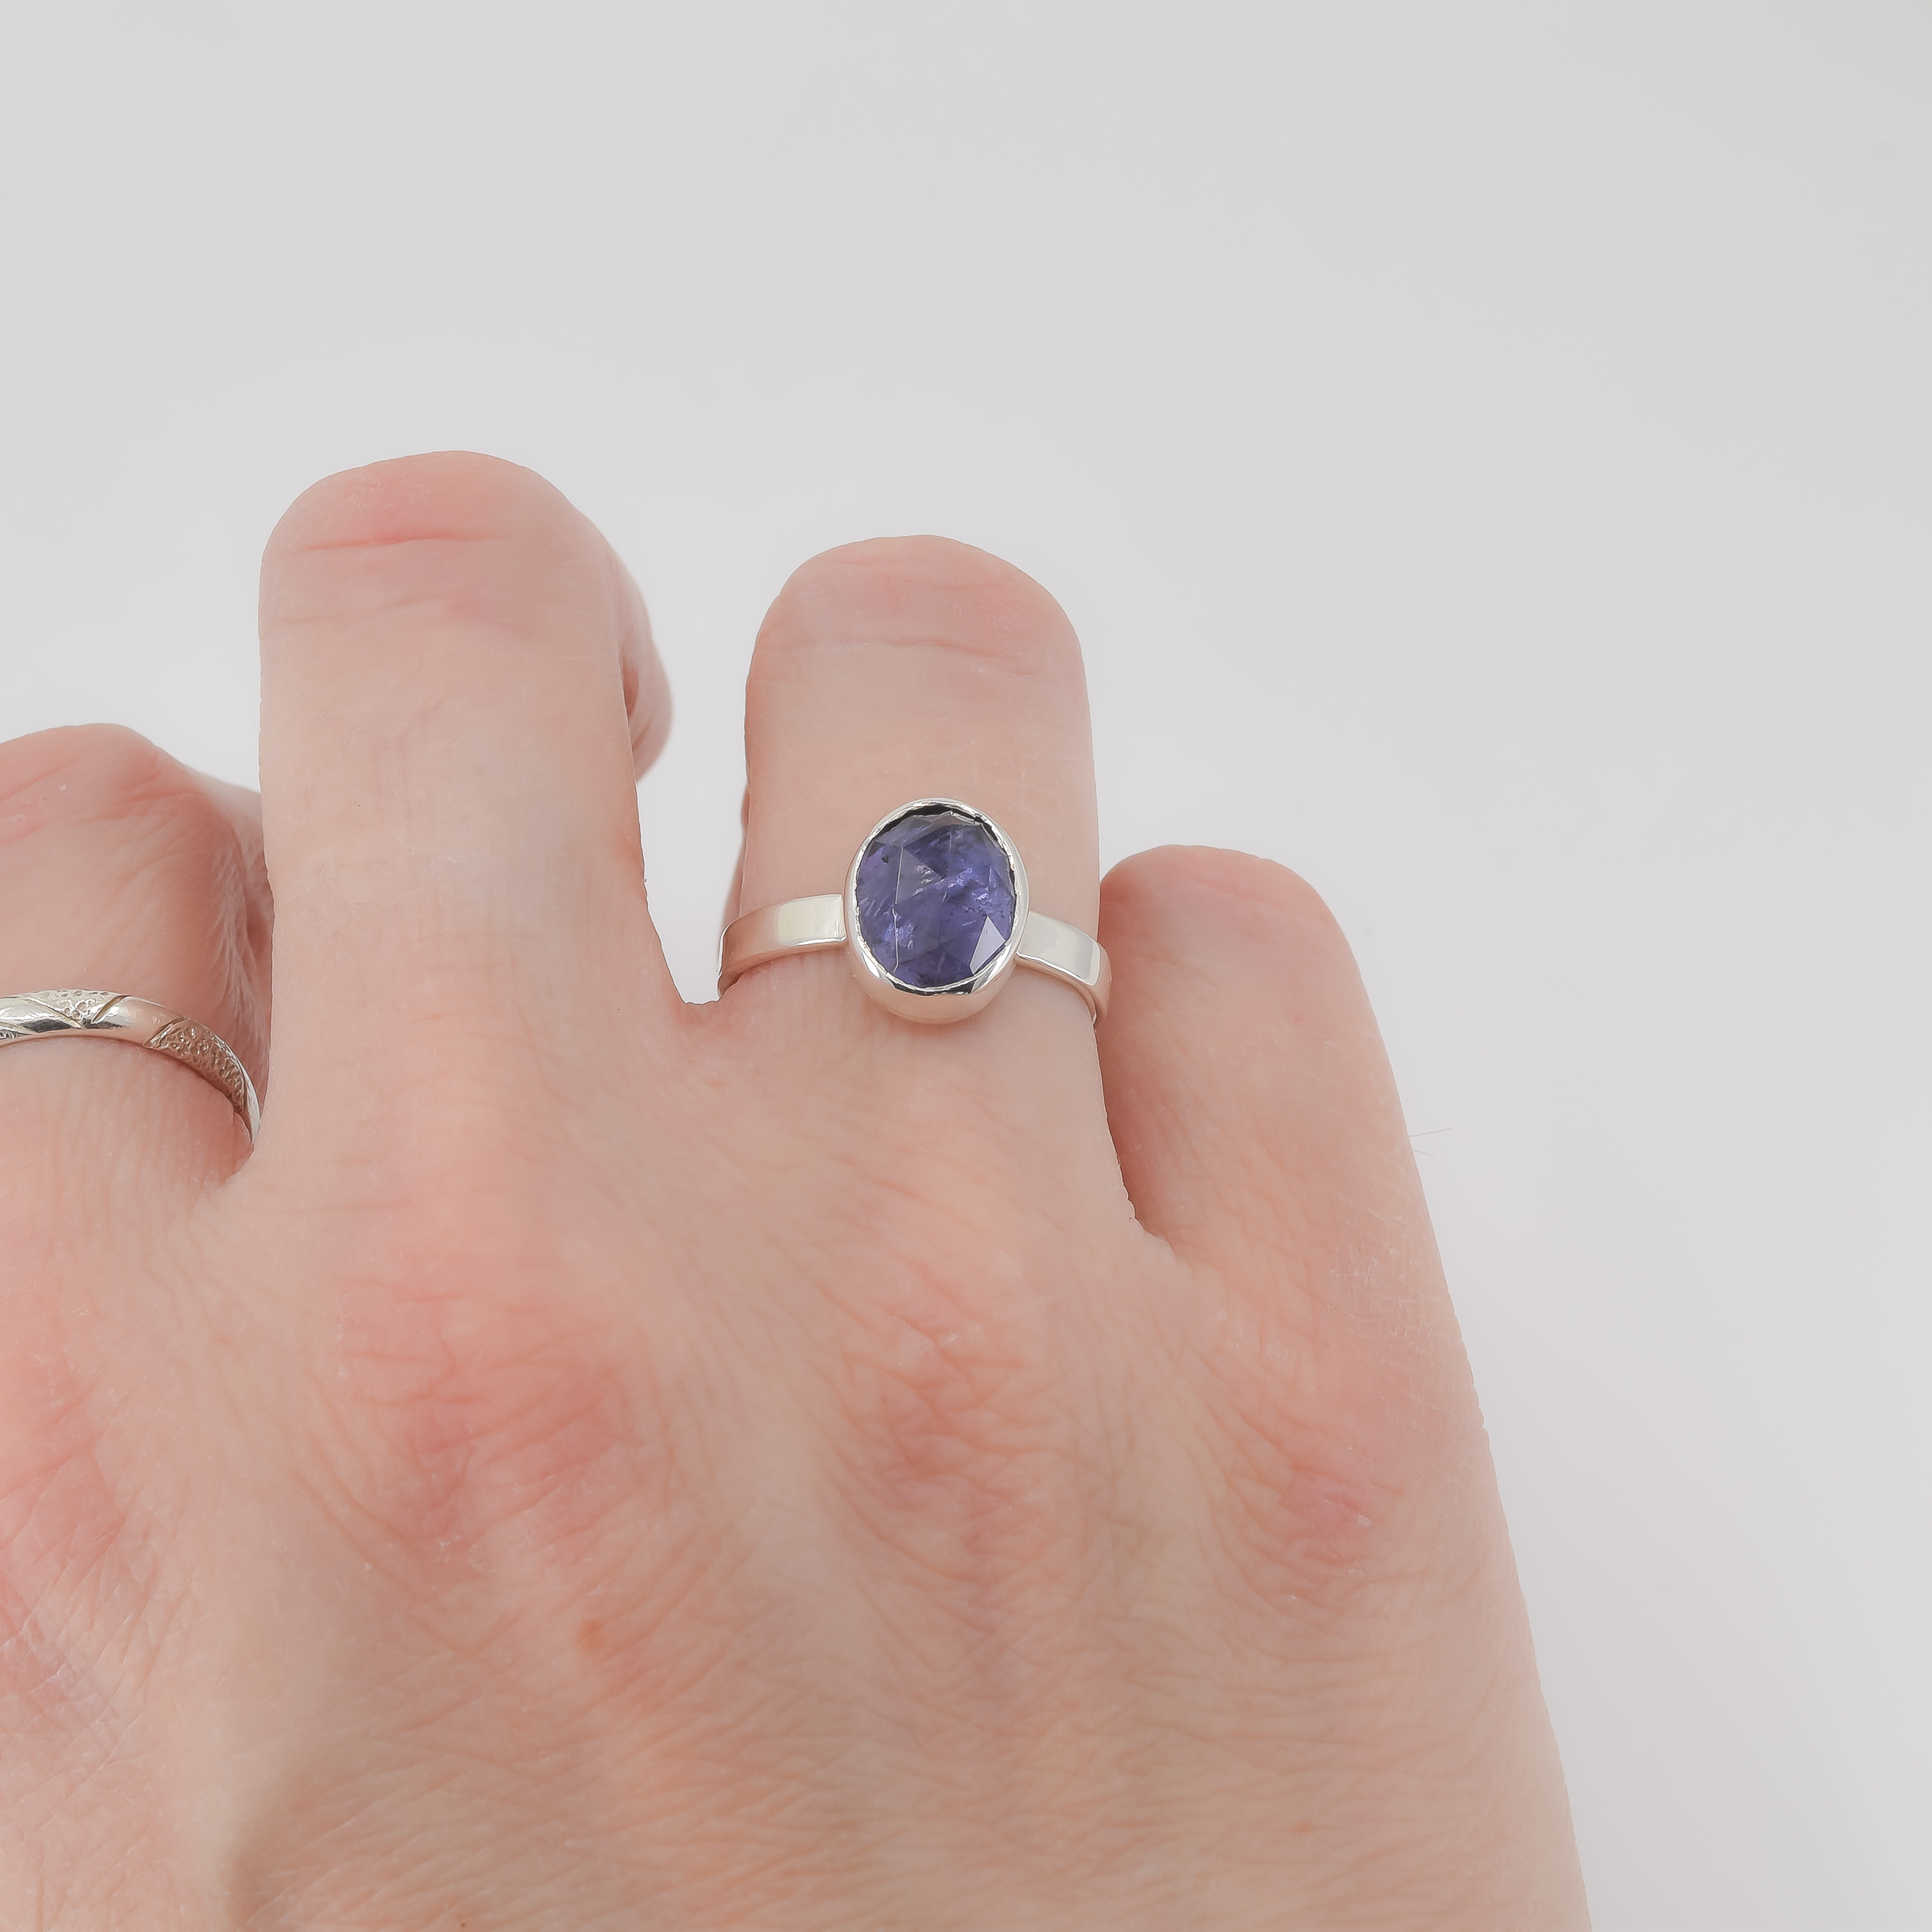 Sterling silver iolite solitaire ring worn on finger